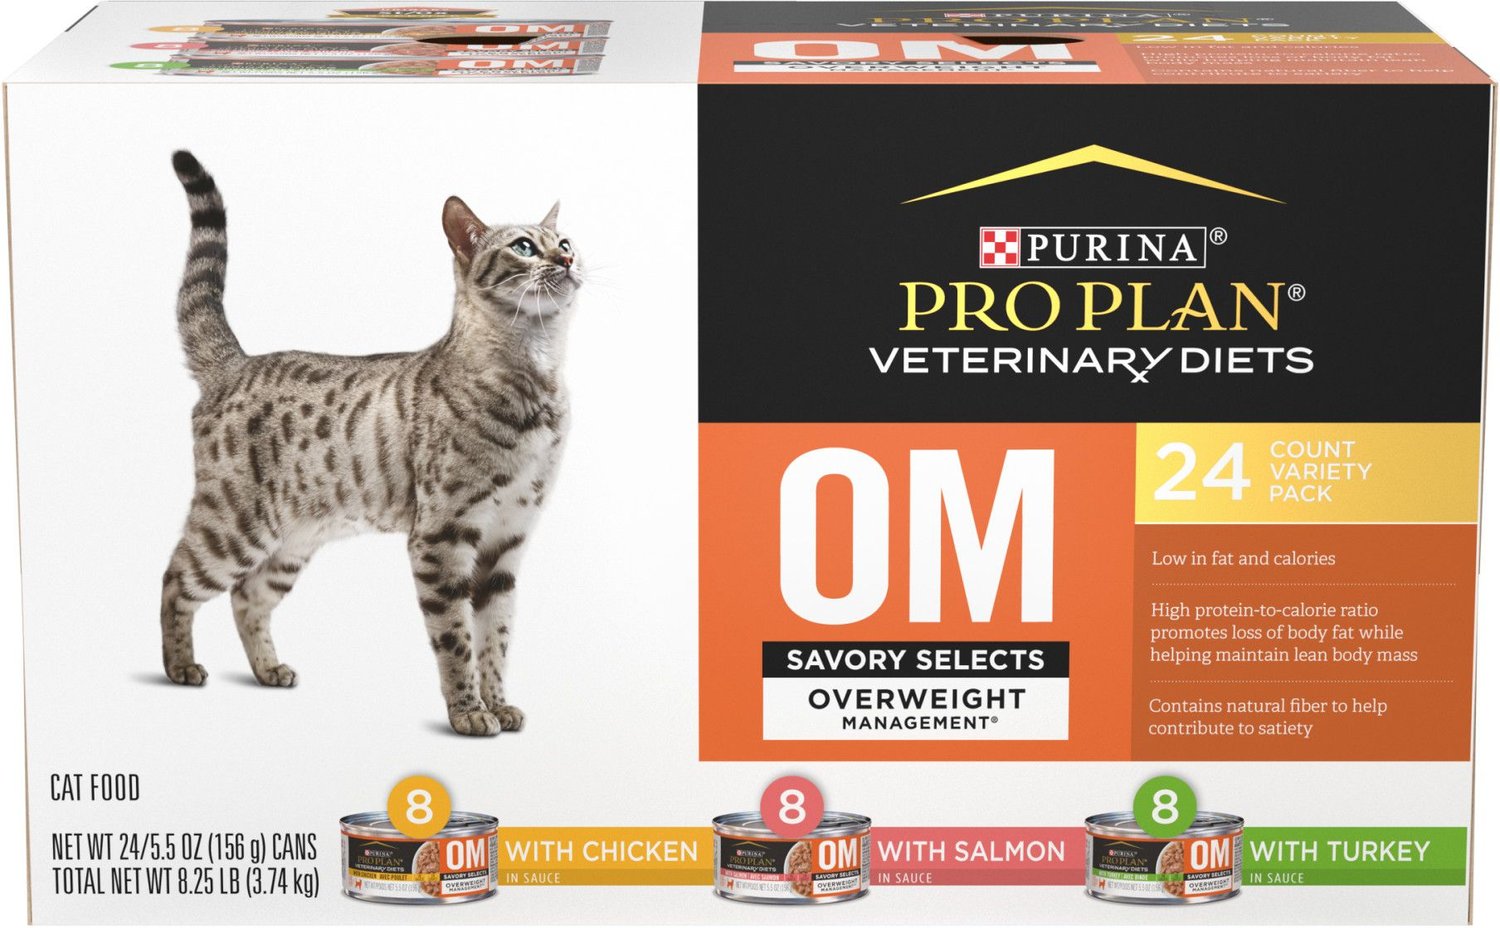 PURINA PRO PLAN VETERINARY DIETS OM Savory Selects Wet Cat Food Variety